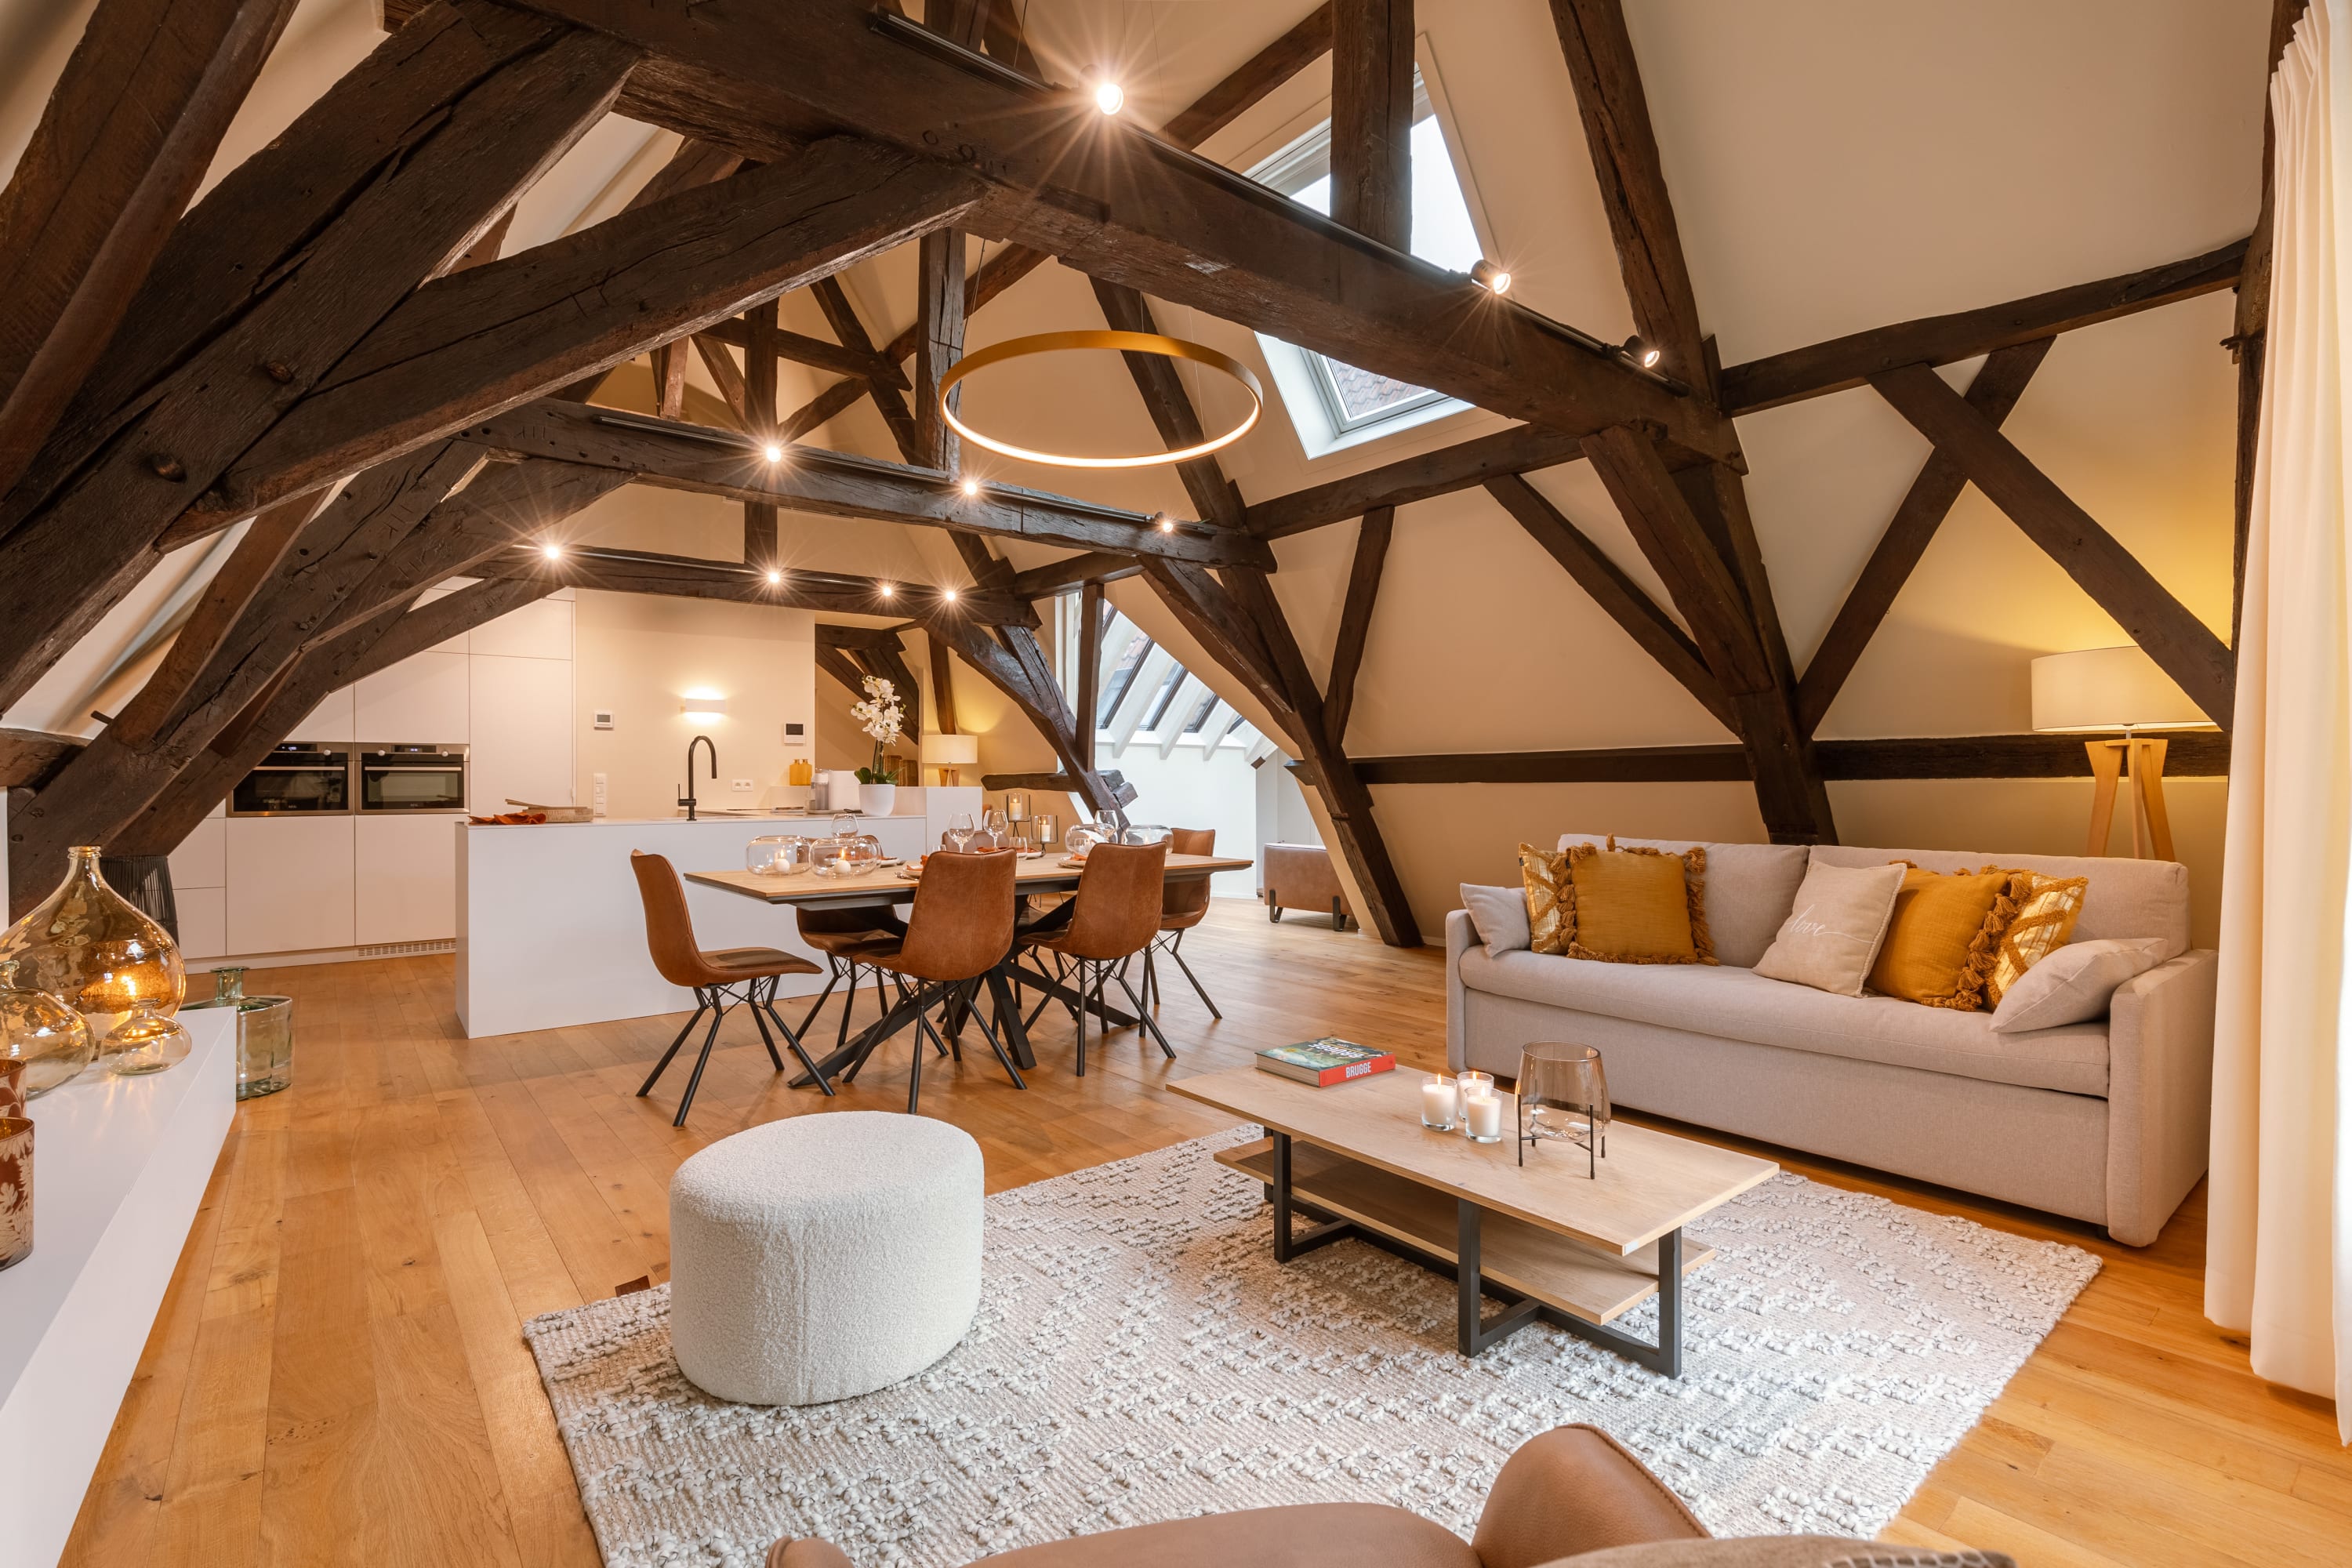 Living room with authentic wooden beams